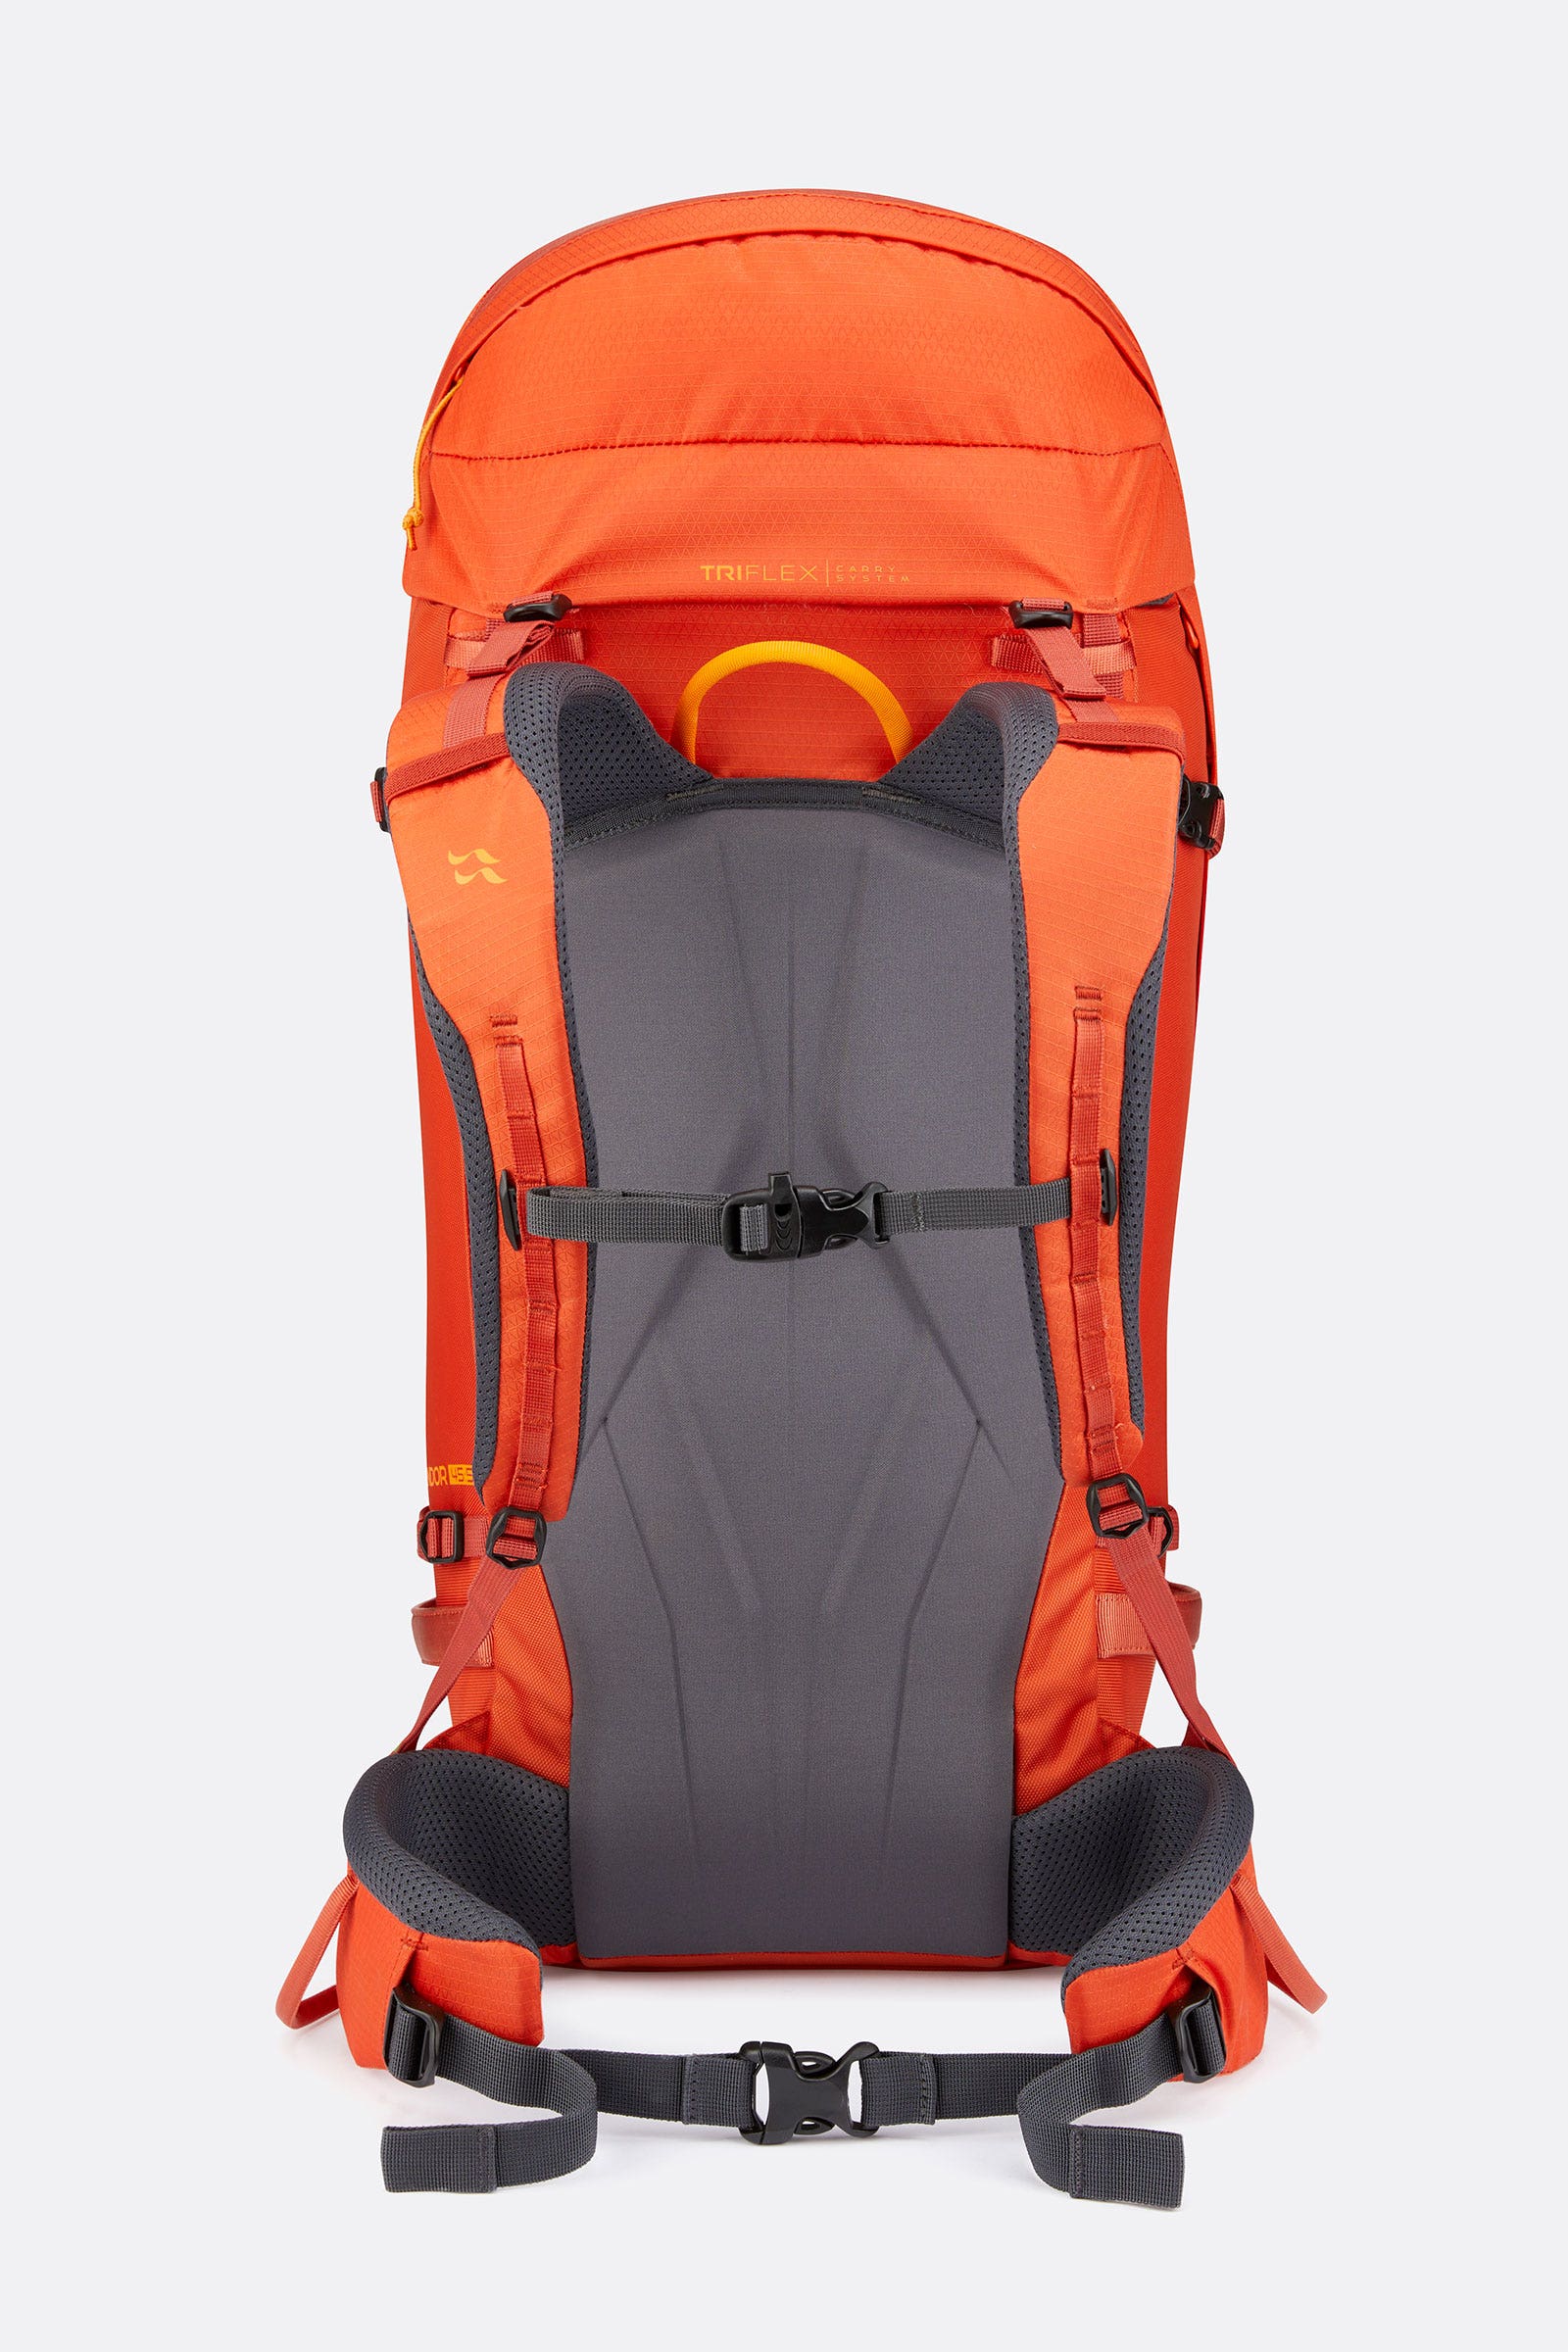 Rab Ascendor 45:50L Mountain Pack  Carry System